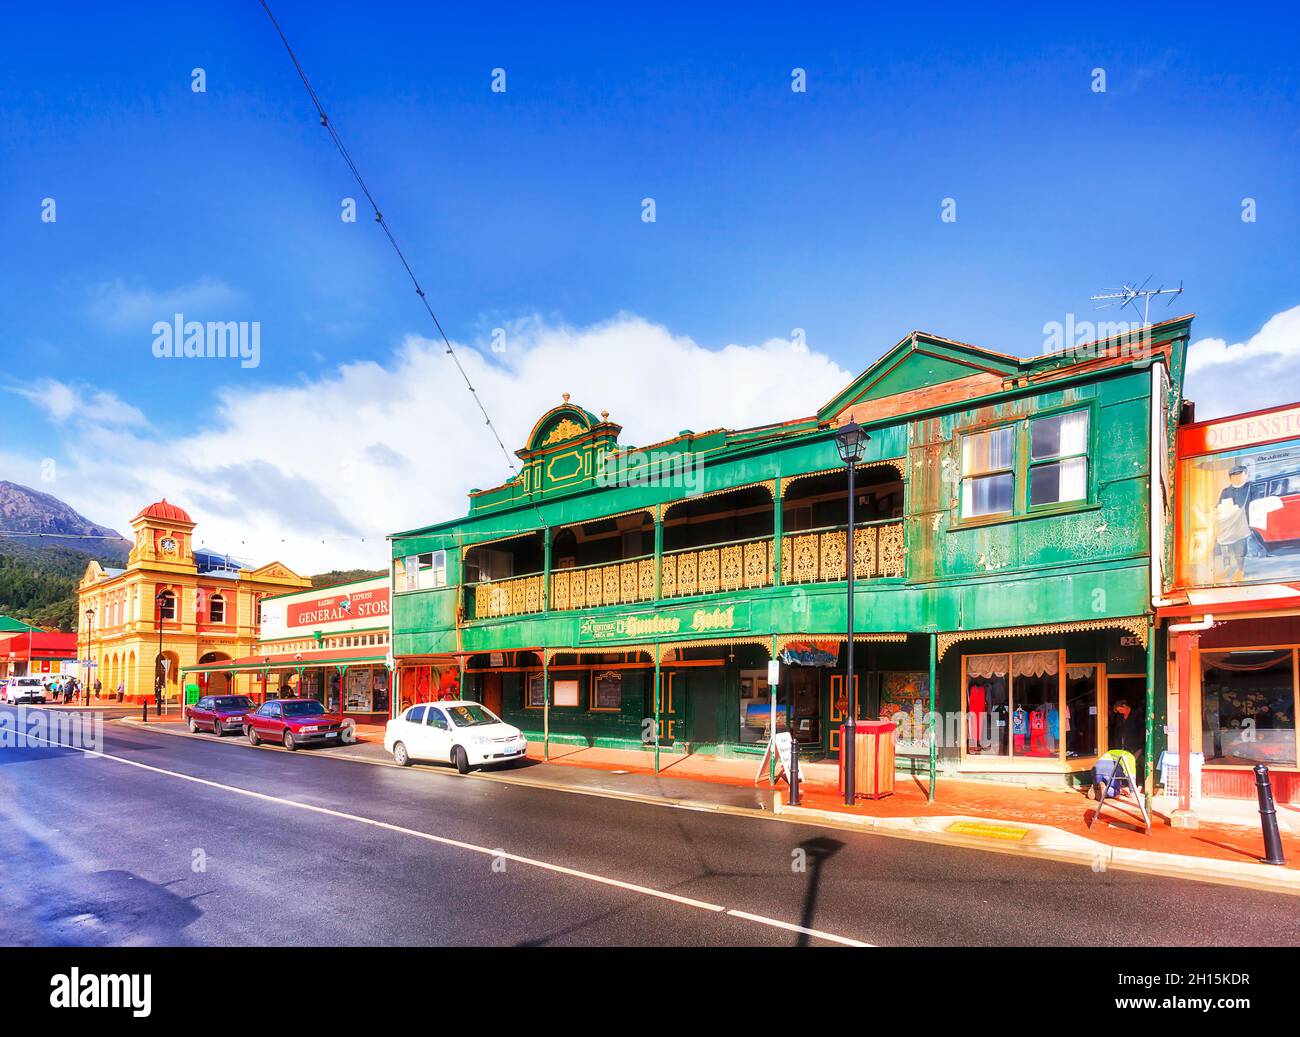 Queenstown, Australia - 24 April 2014: Main shopping street with general stores and historic heritage hotel under blue sky. Stock Photo